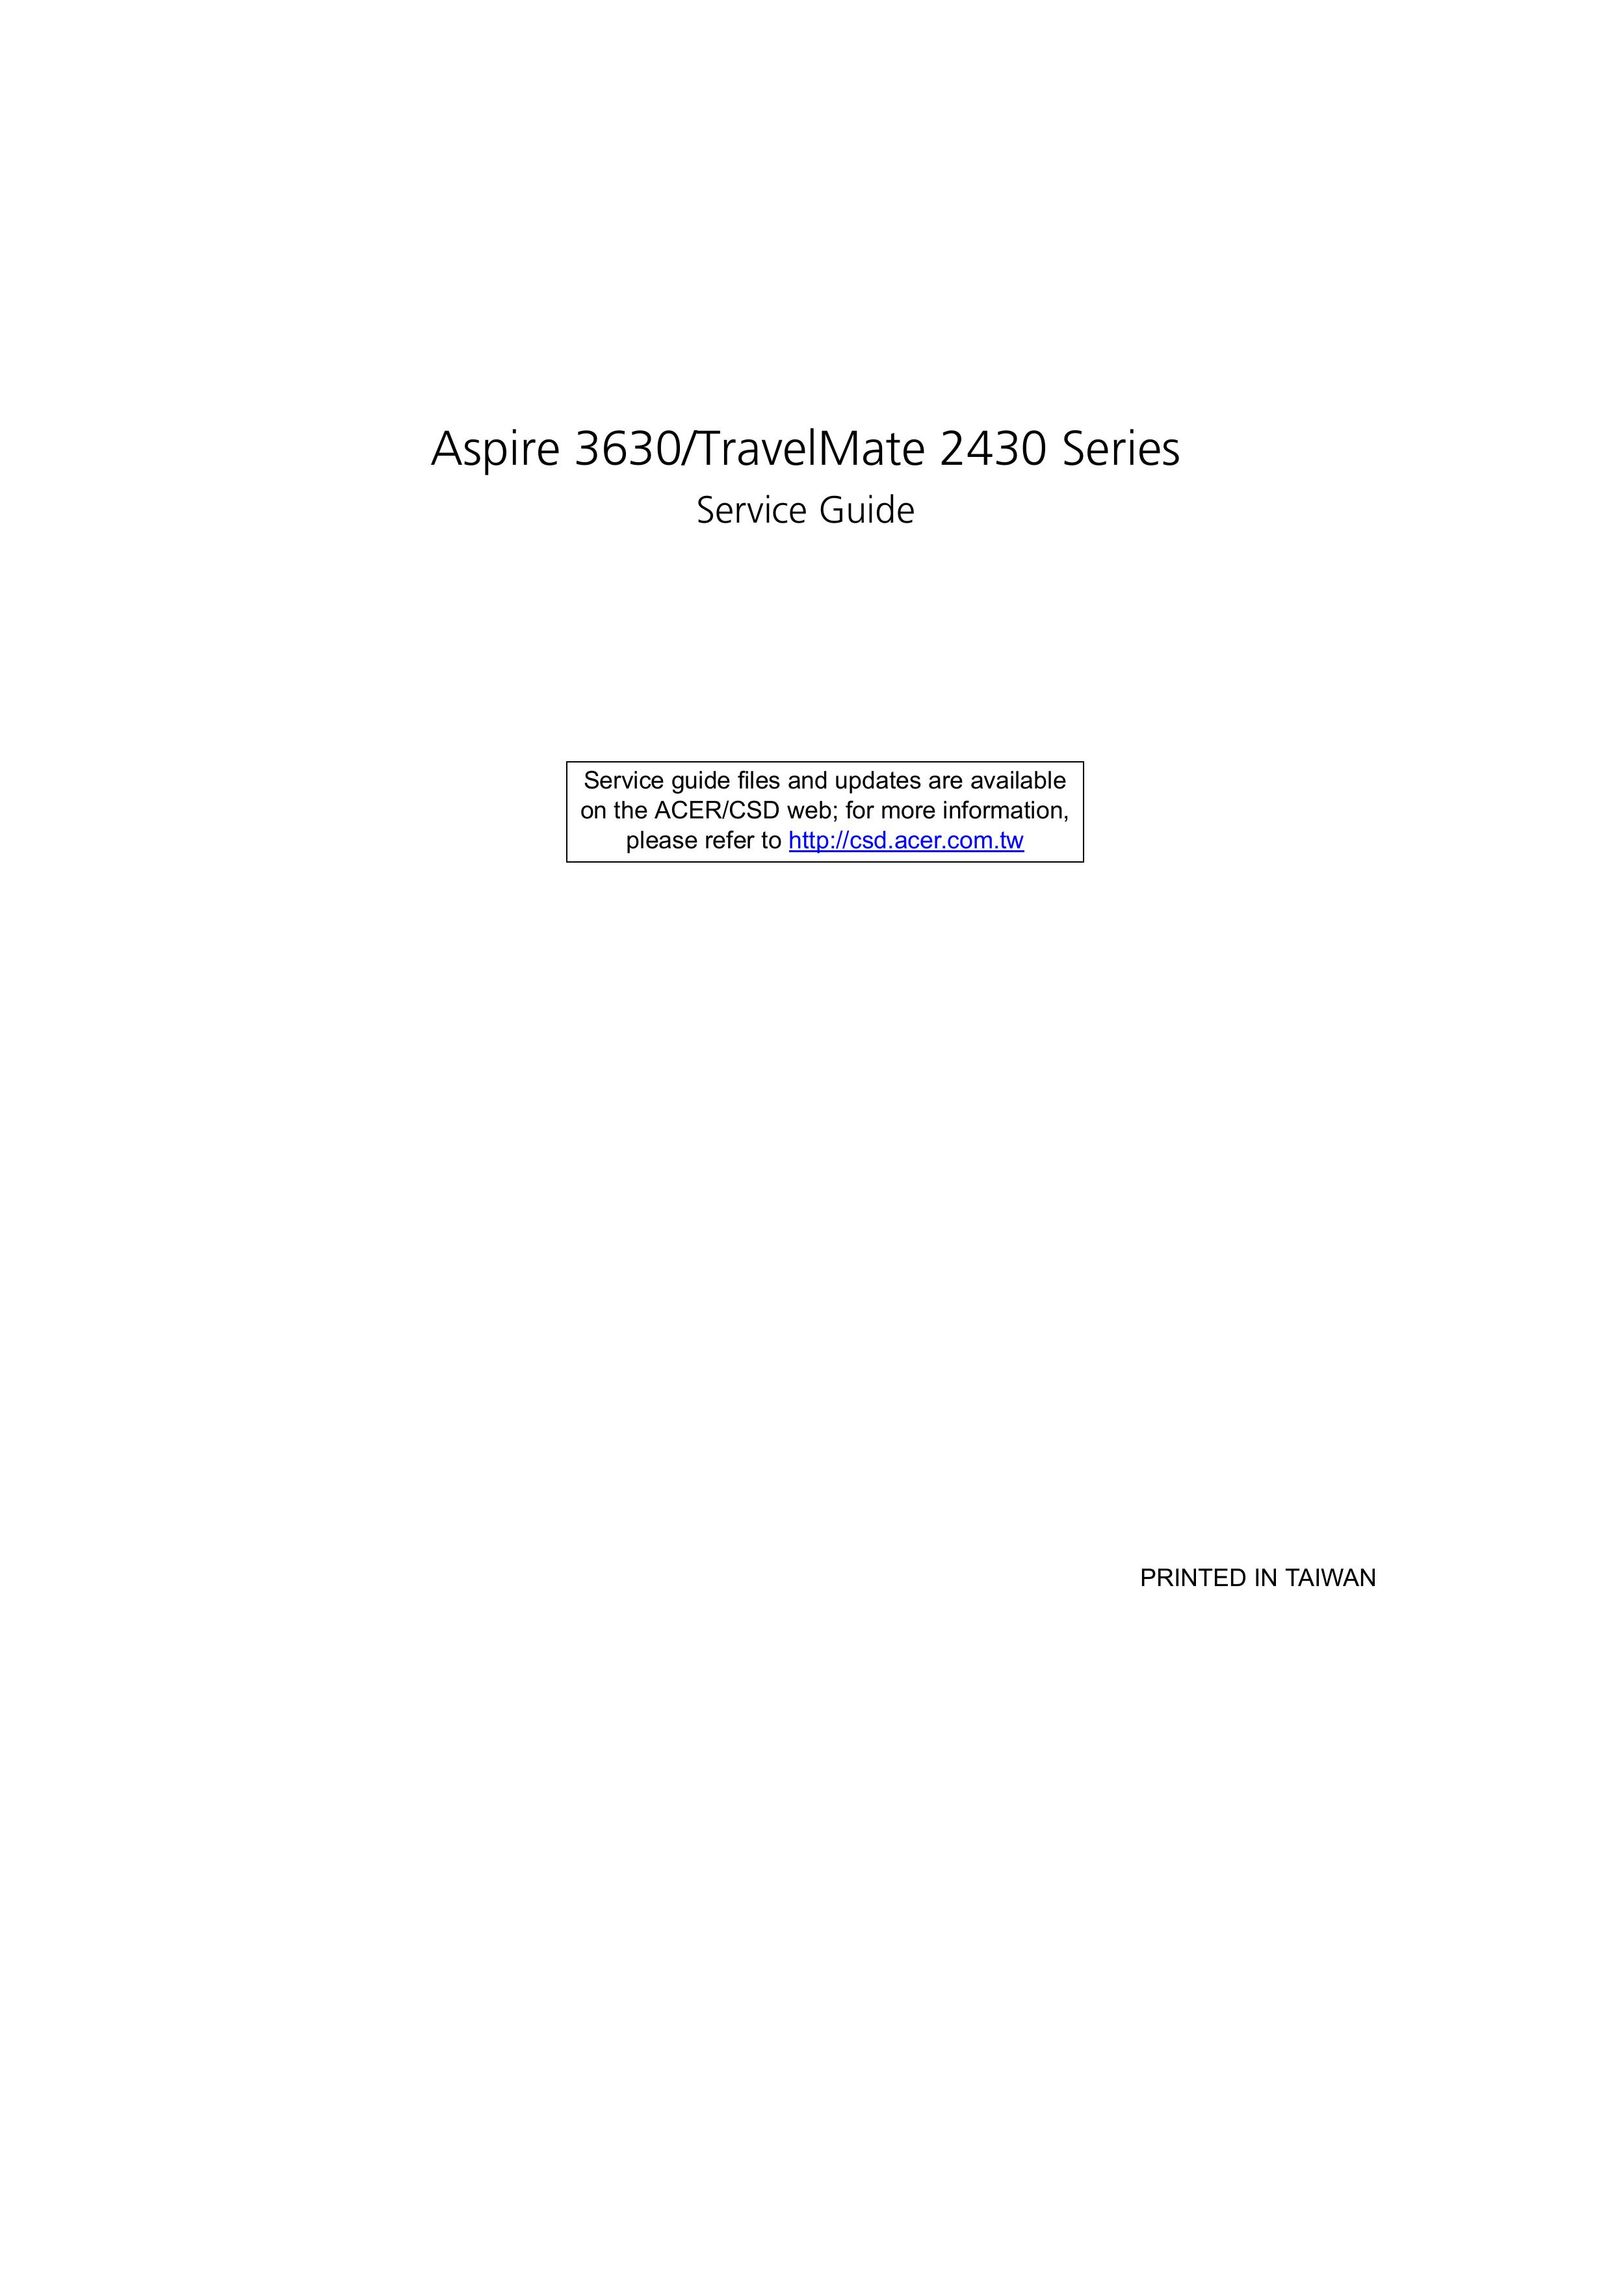 Acer 2430 Personal Computer User Manual